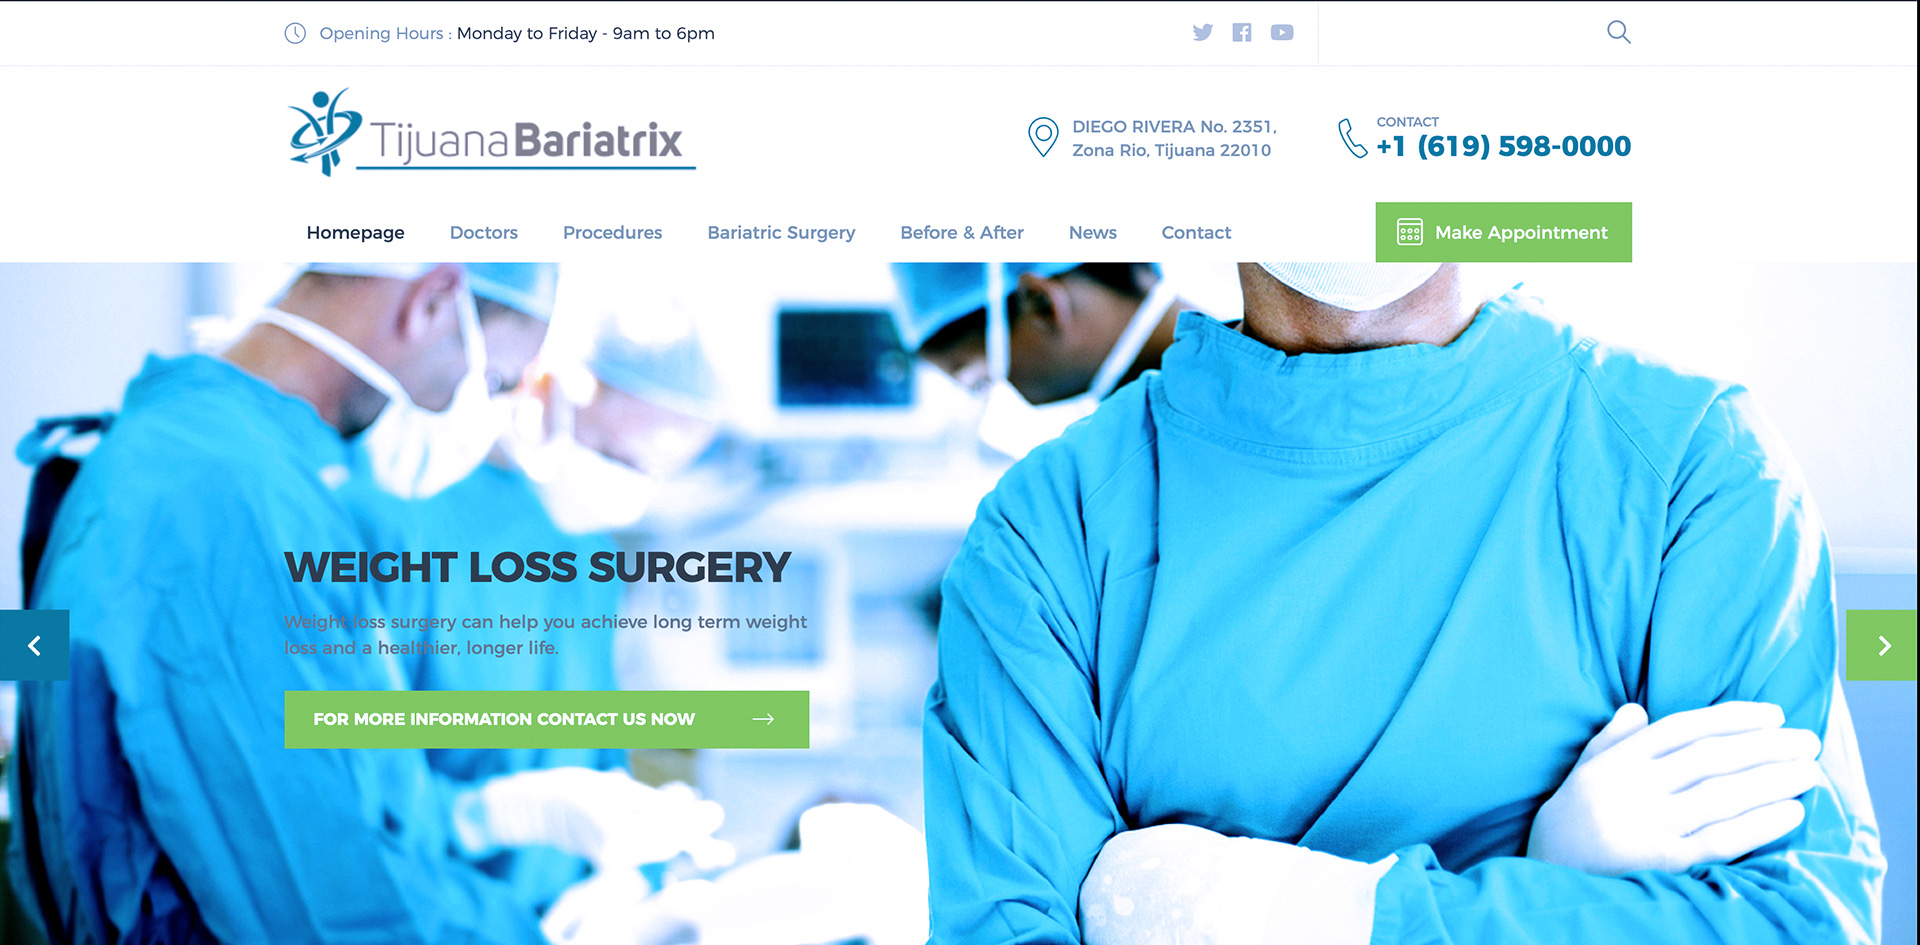 At Bariatric Surgery Tijuana we are dedicated to providing the highest quality of surgical weight loss management in a caring and compassionate setting.